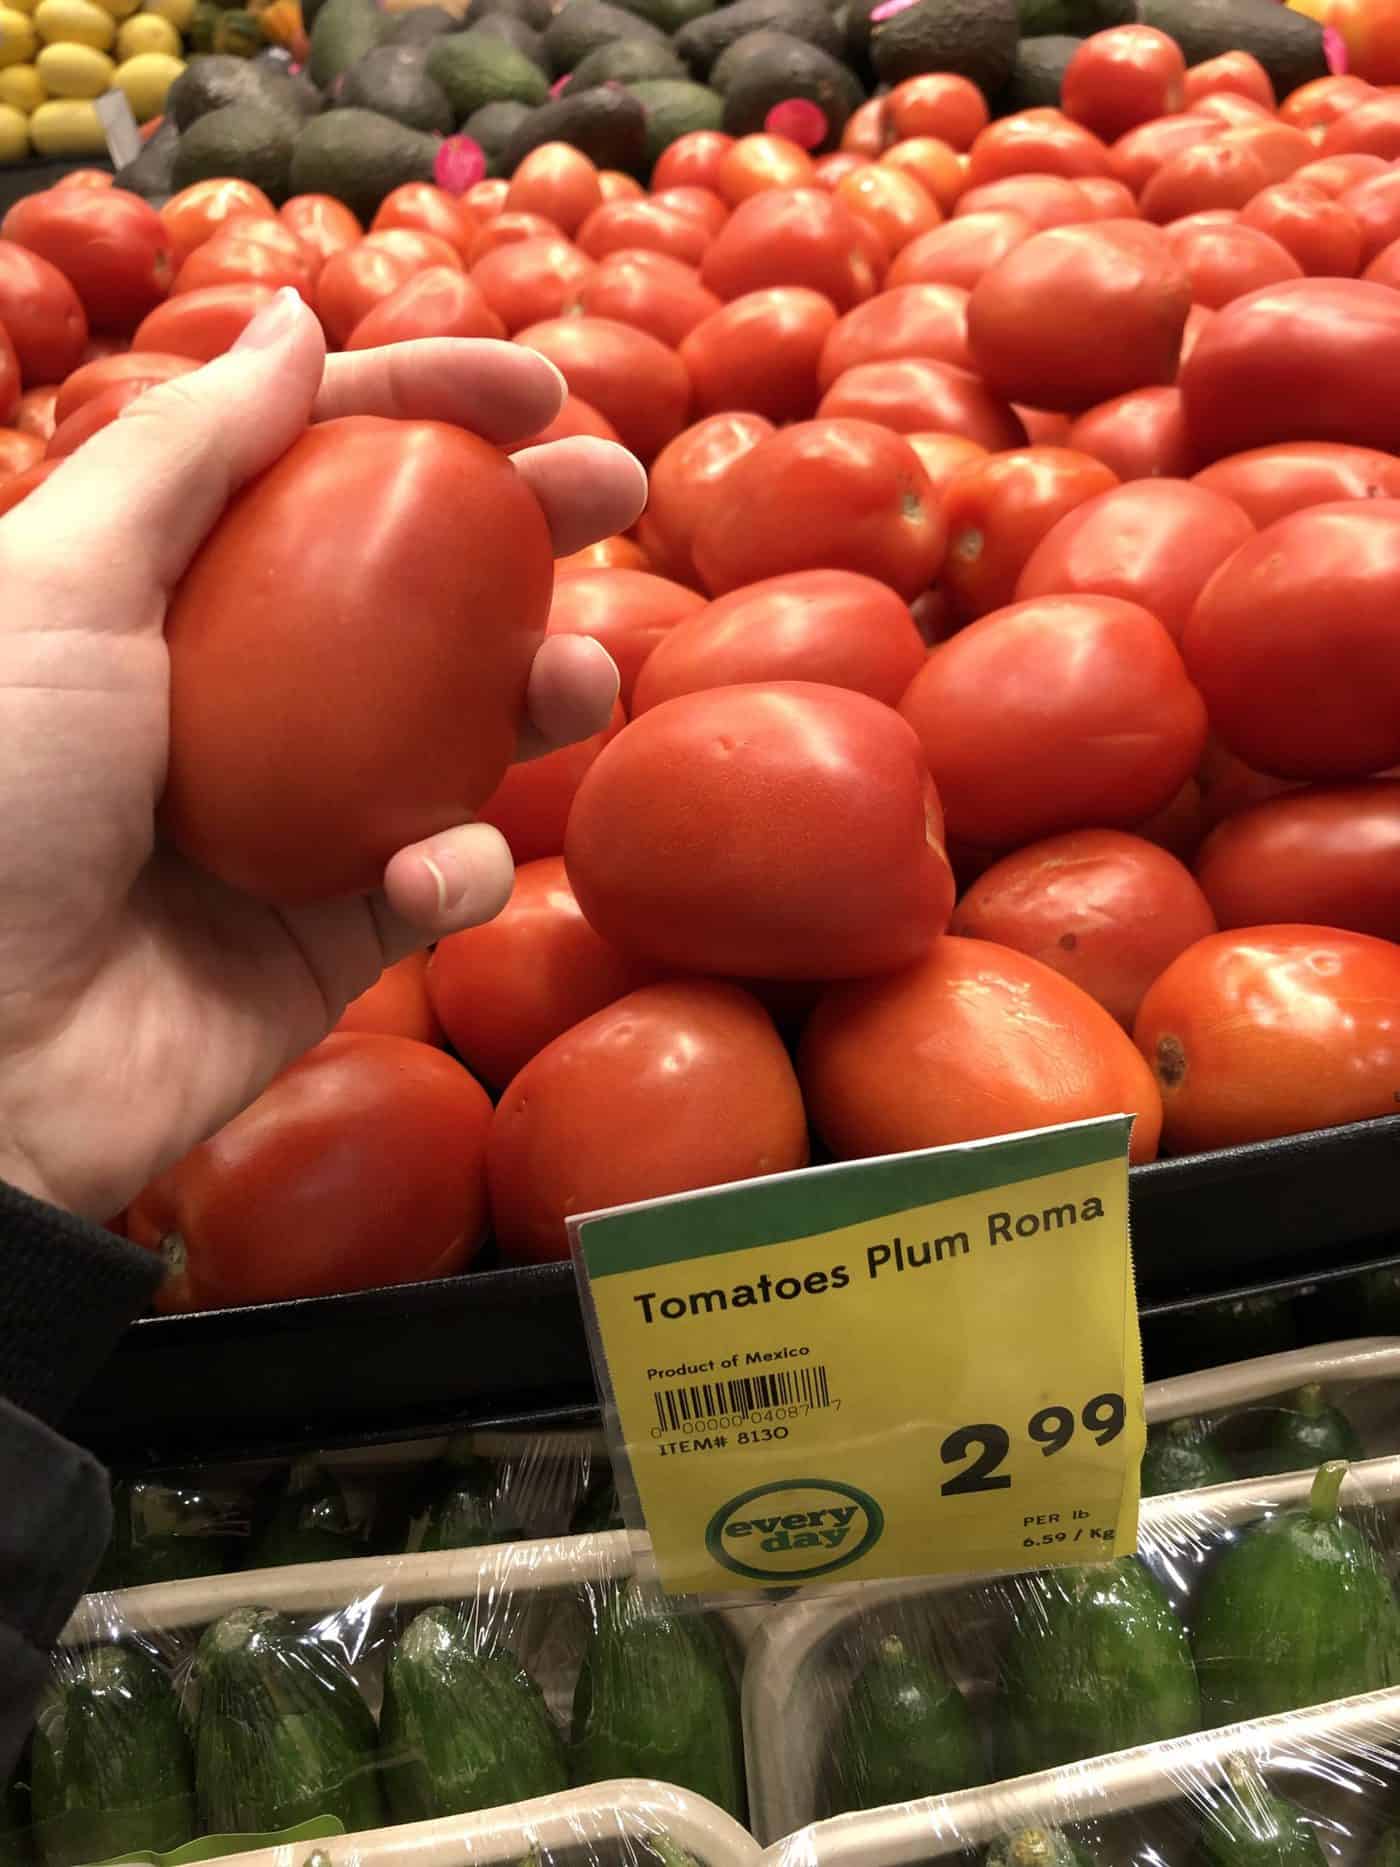 Plum tomatoes at the grocery store